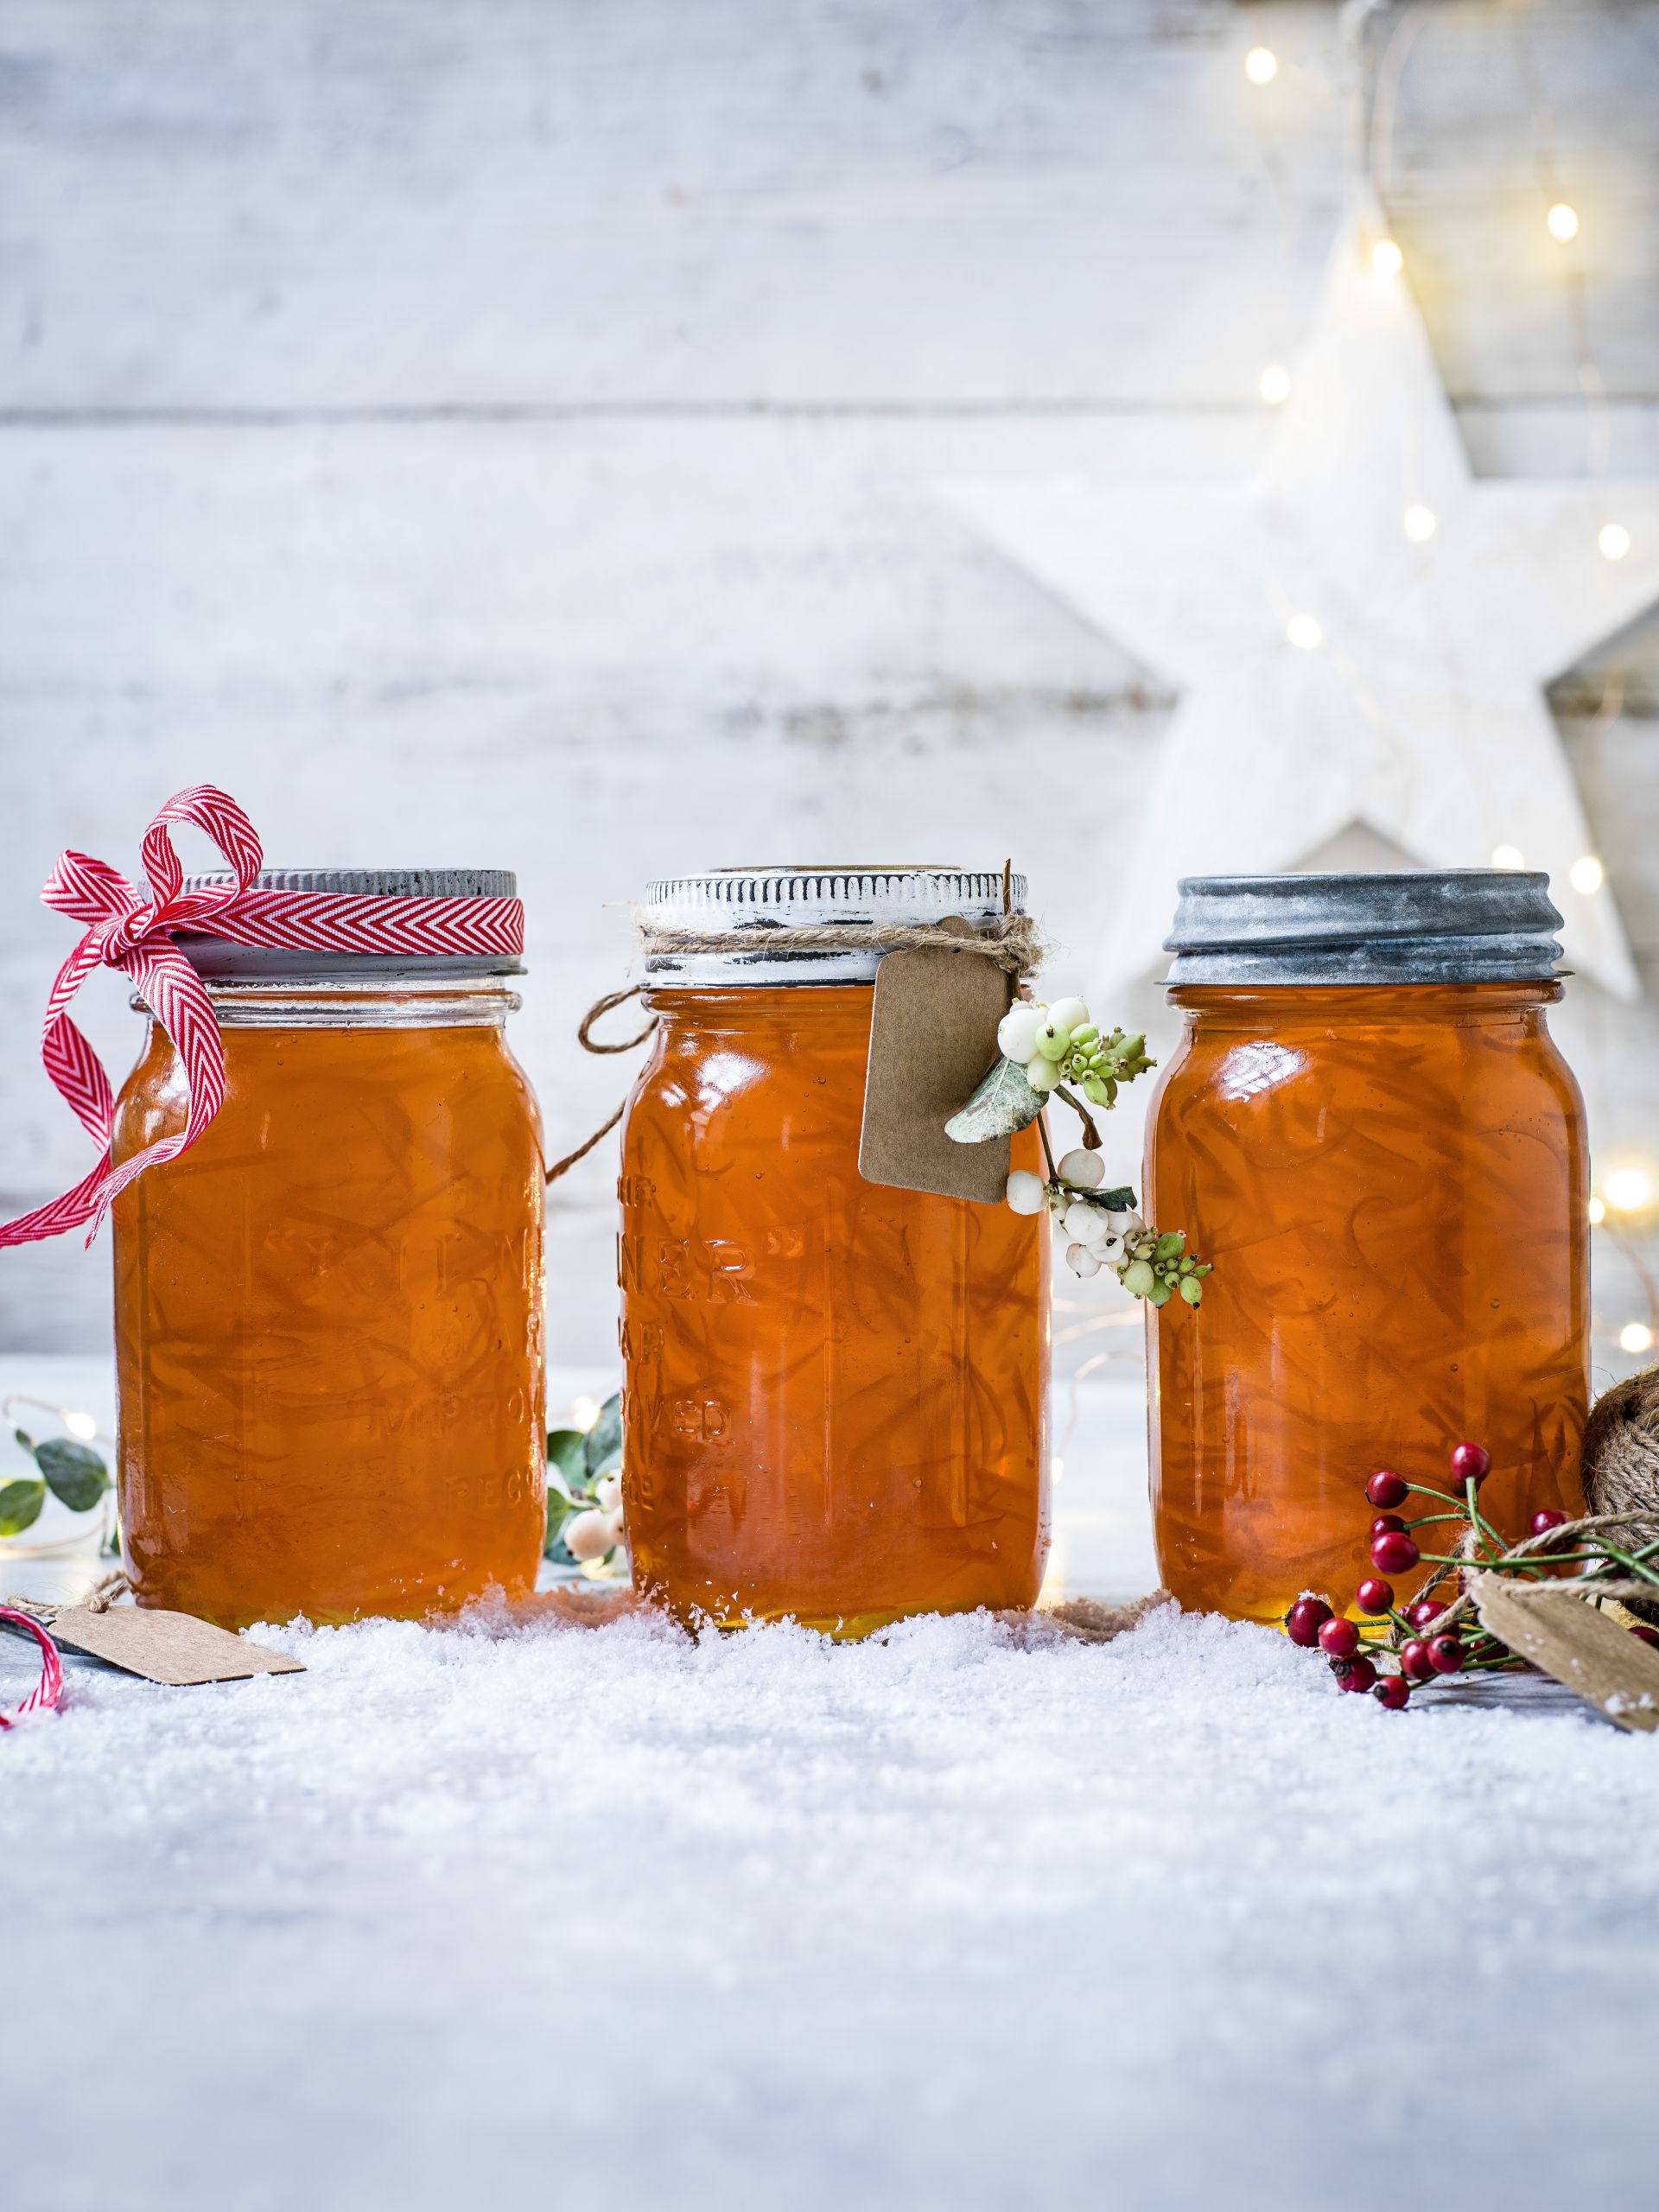 Best Christmas Gift Ever
 25 Homemade Food Gifts For Christmas olivemagazine